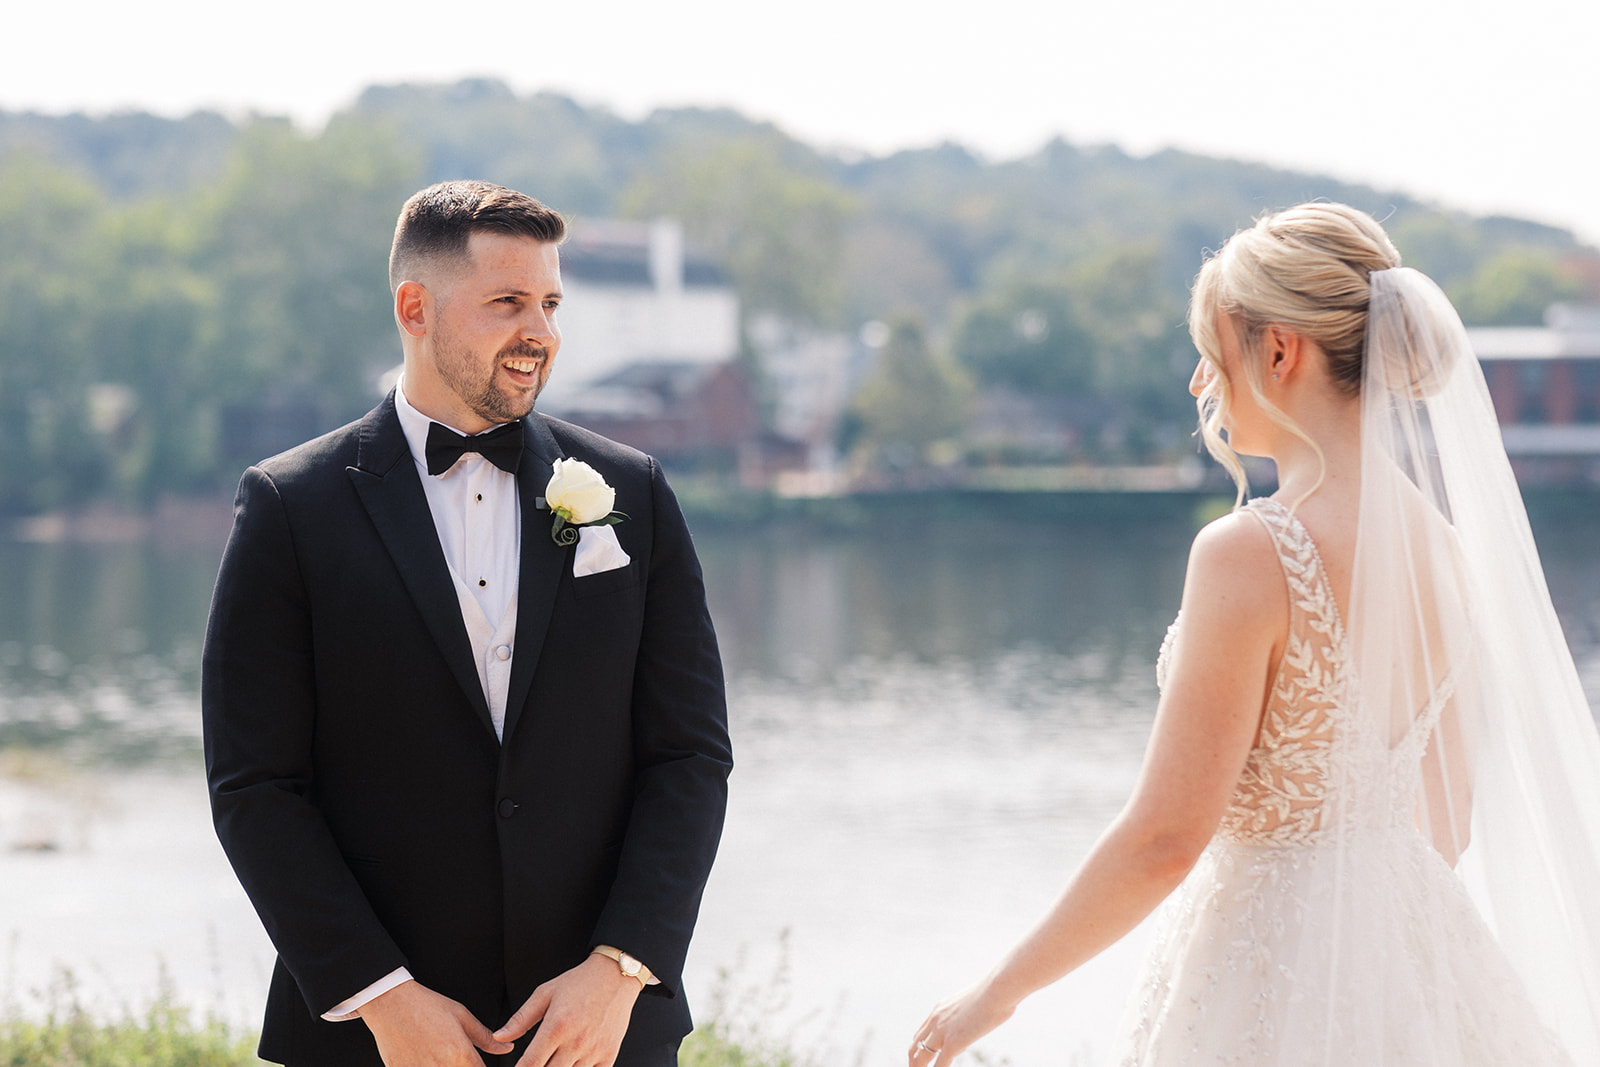 A groom in a black tuxedo smiles while standing outside by a river seeing his bride in her dress in a first look at Lambertville Station Wedding venue